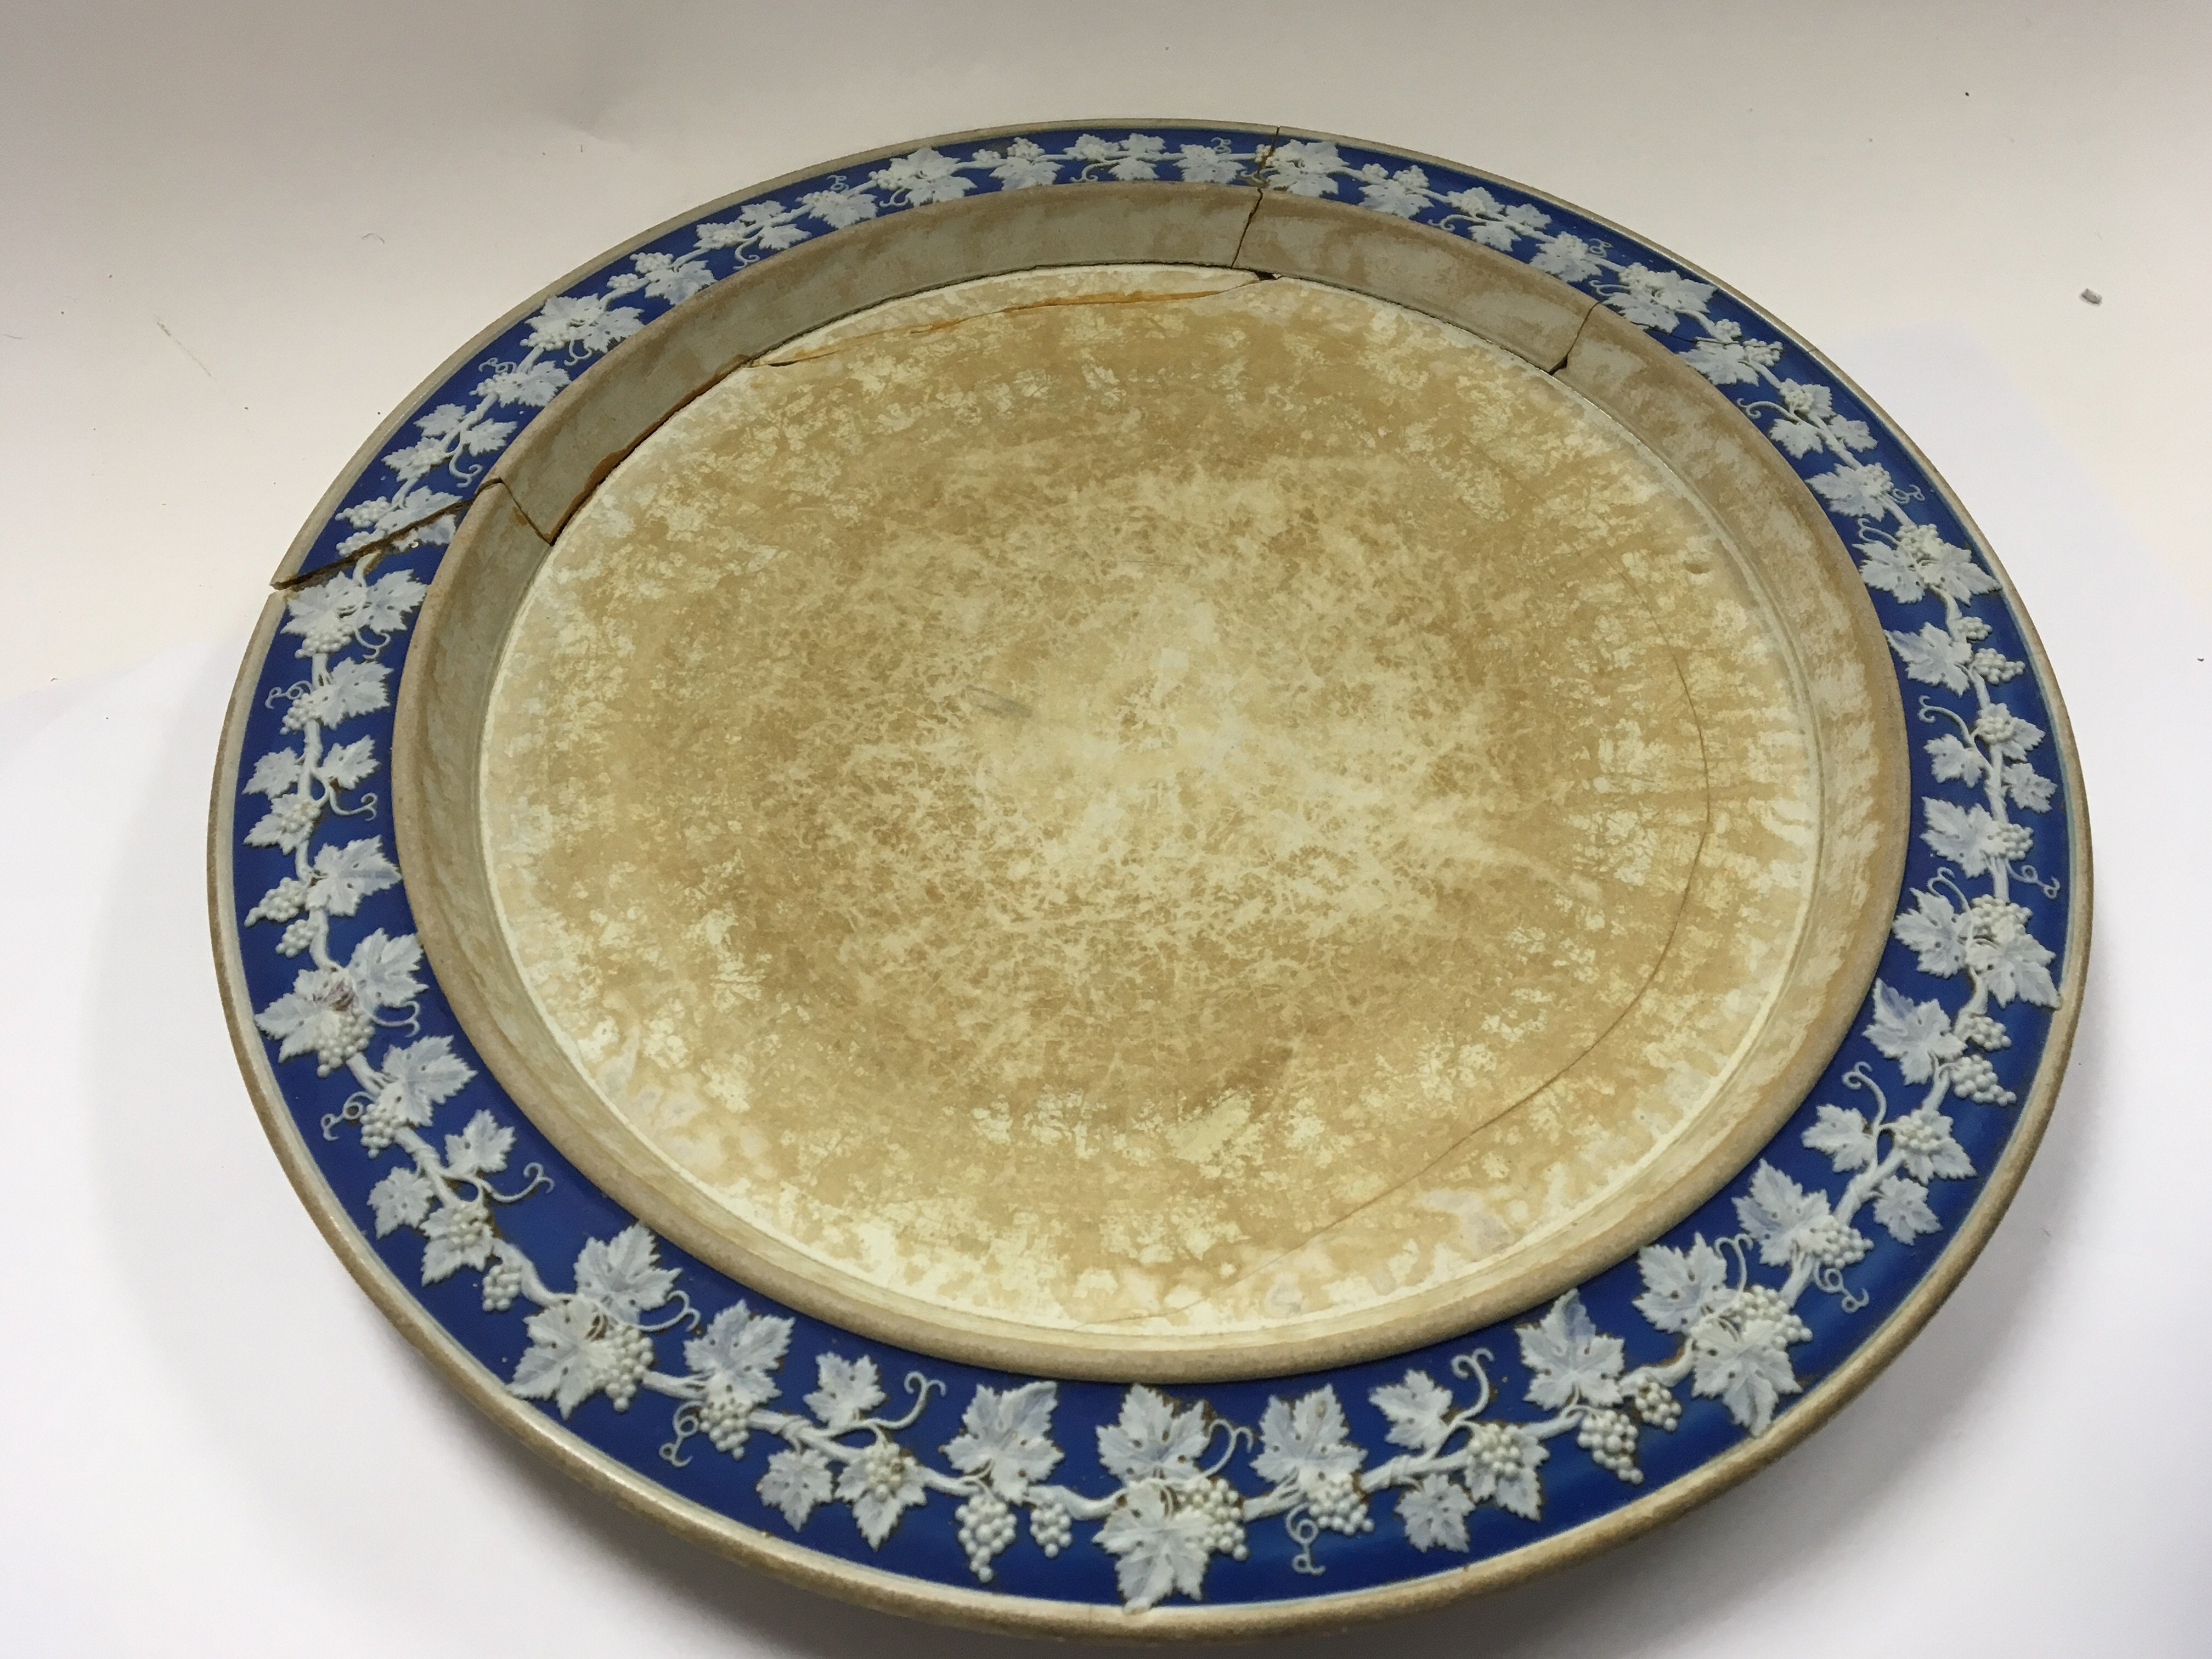 A 19th century Wedgwood type jasper ware cheese di - Image 2 of 3